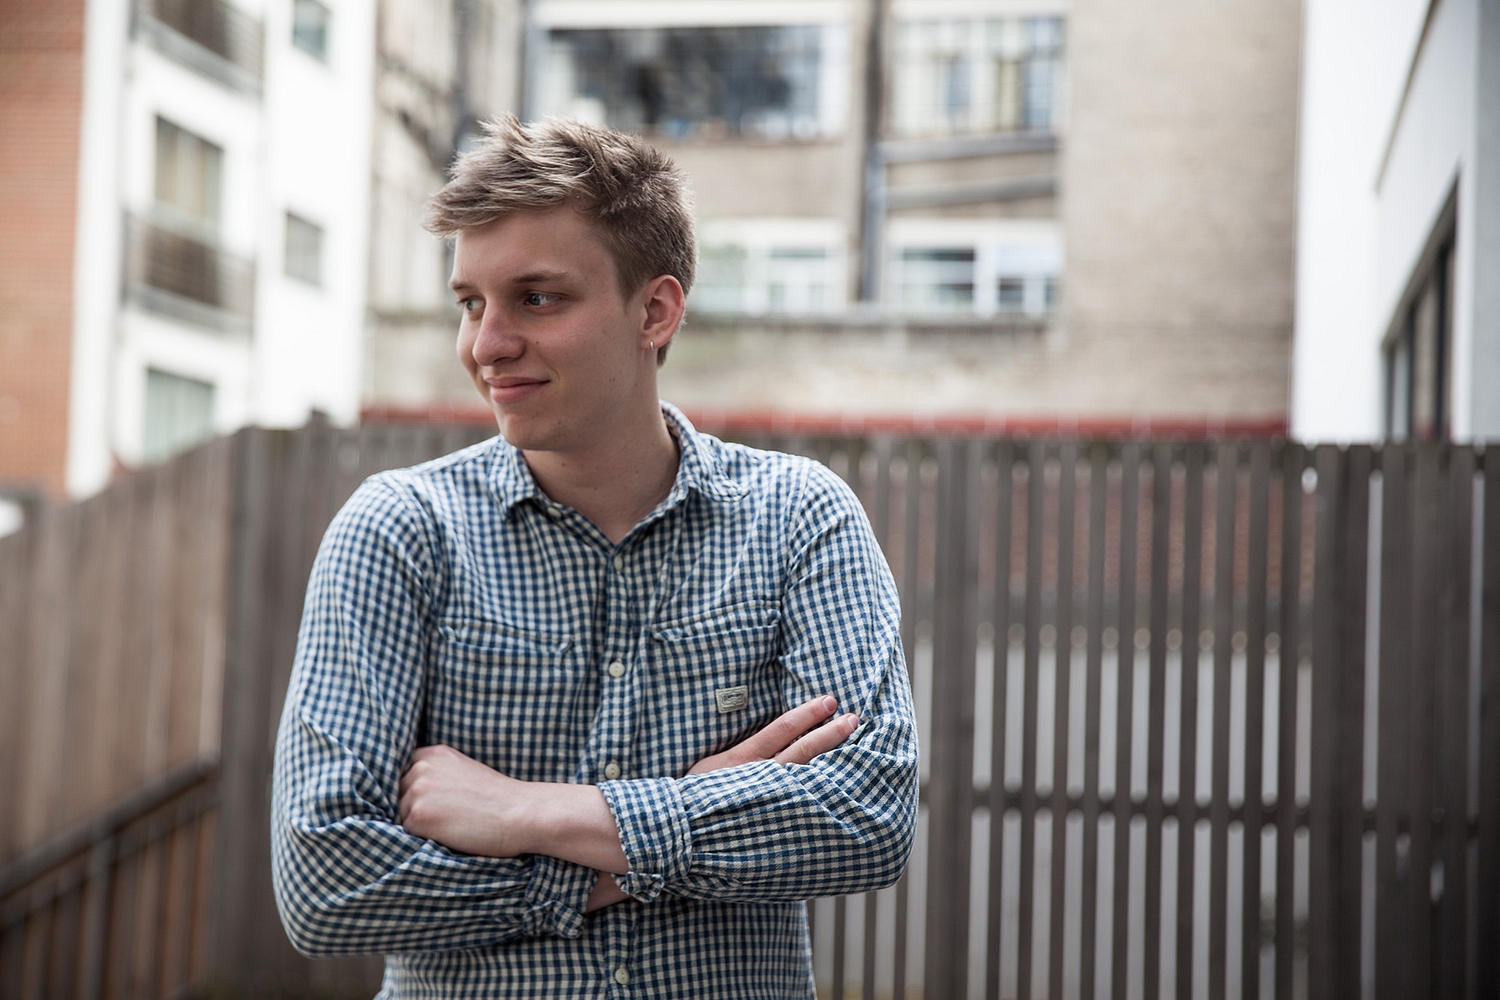 Watch George Ezra perform tracks from his ‘Live In London’ EP